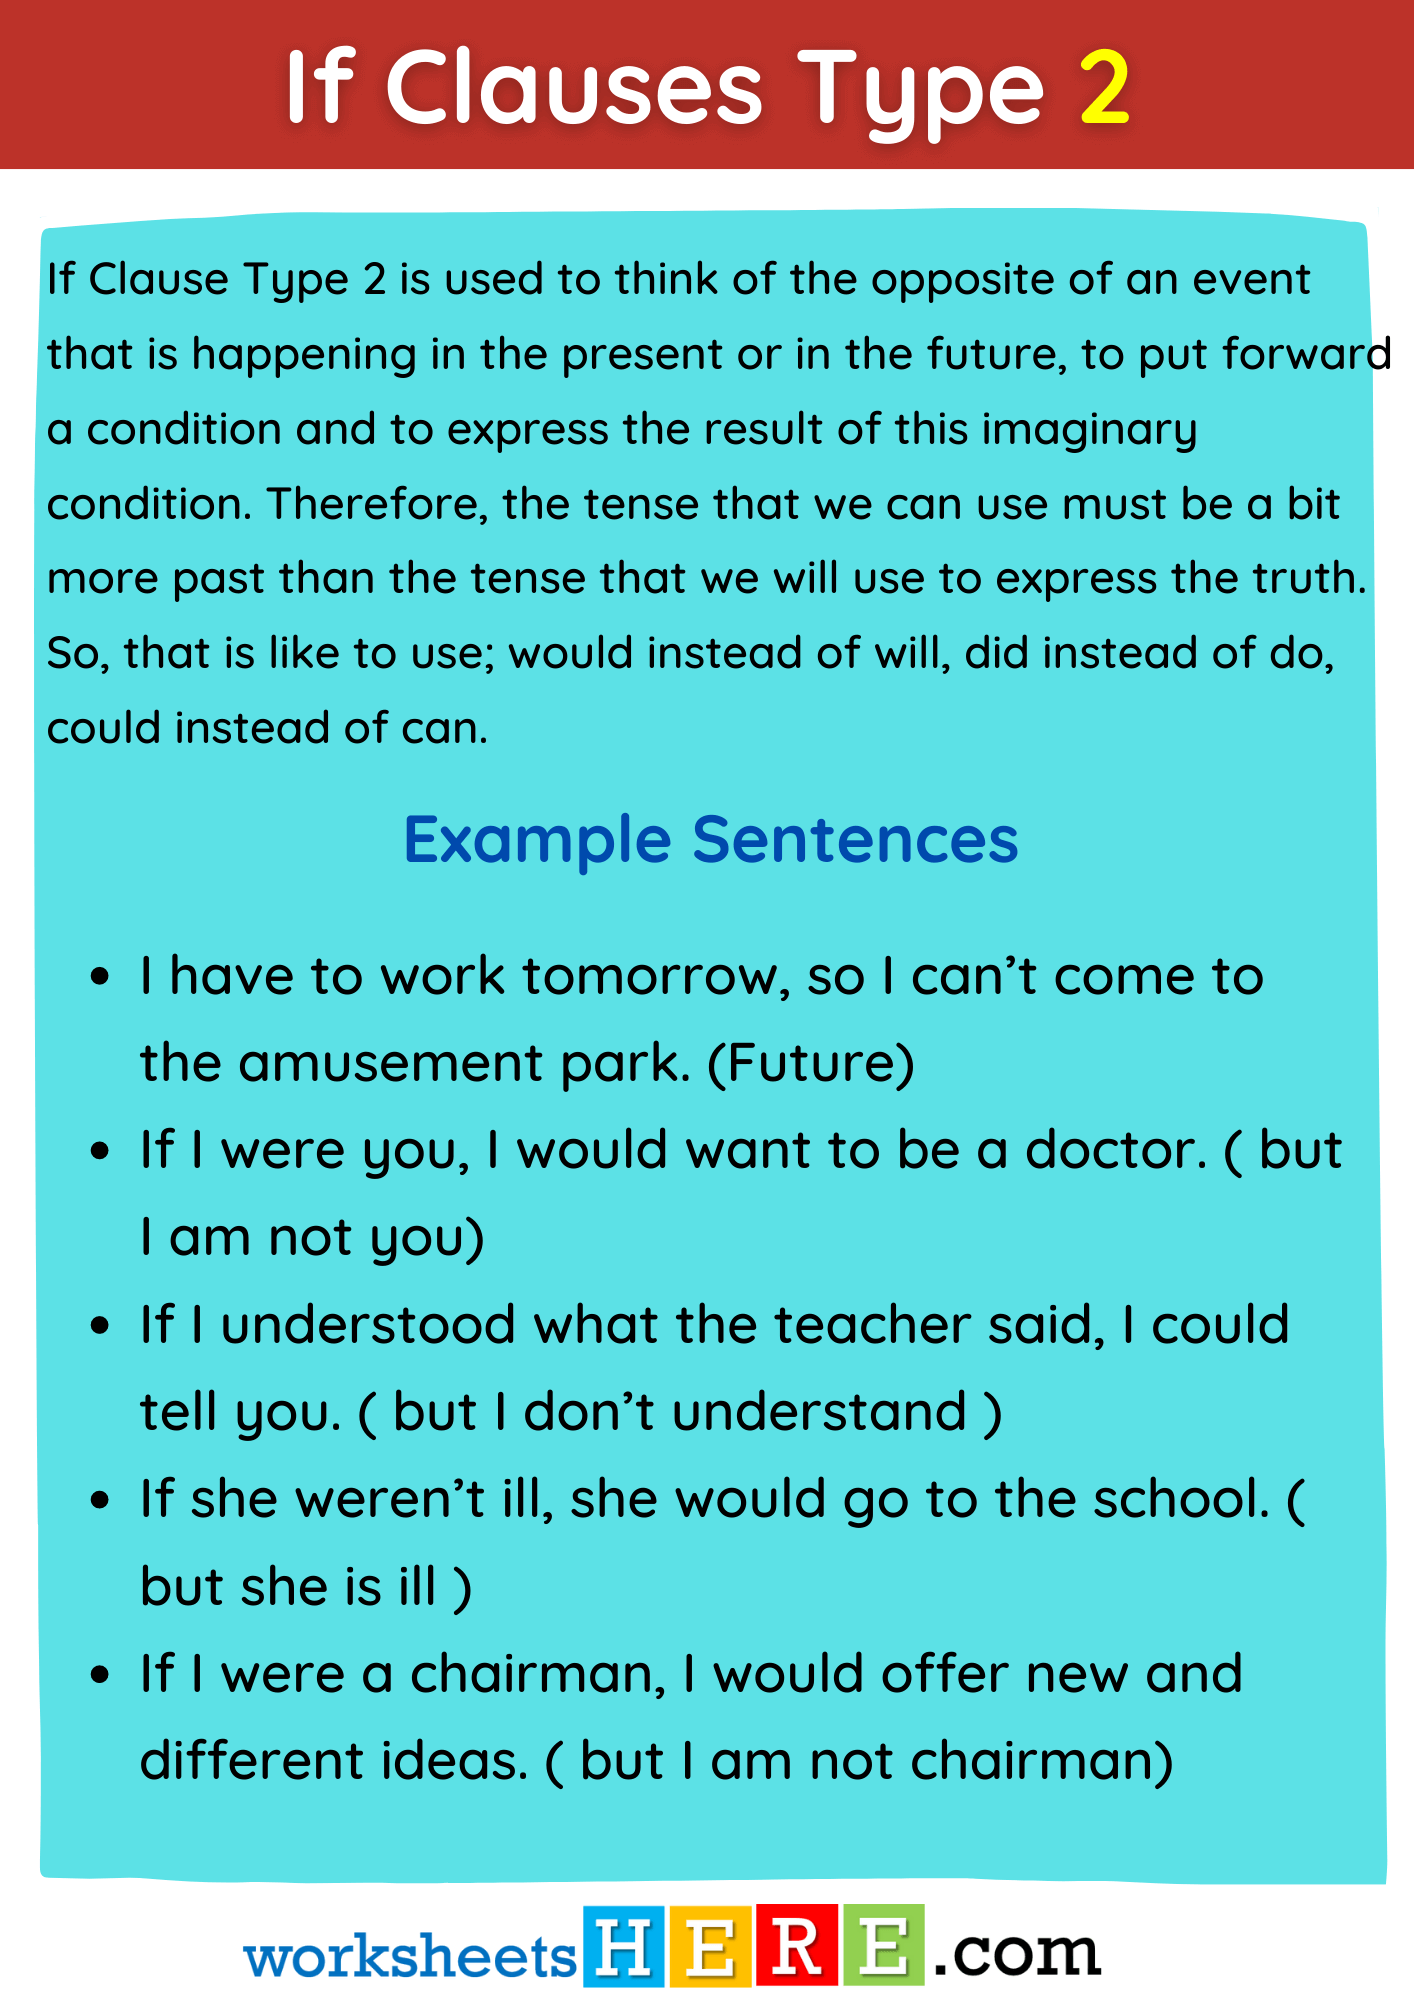 If Clauses Type 2 Second Type Definition and Example Sentences PDF Worksheet For Students